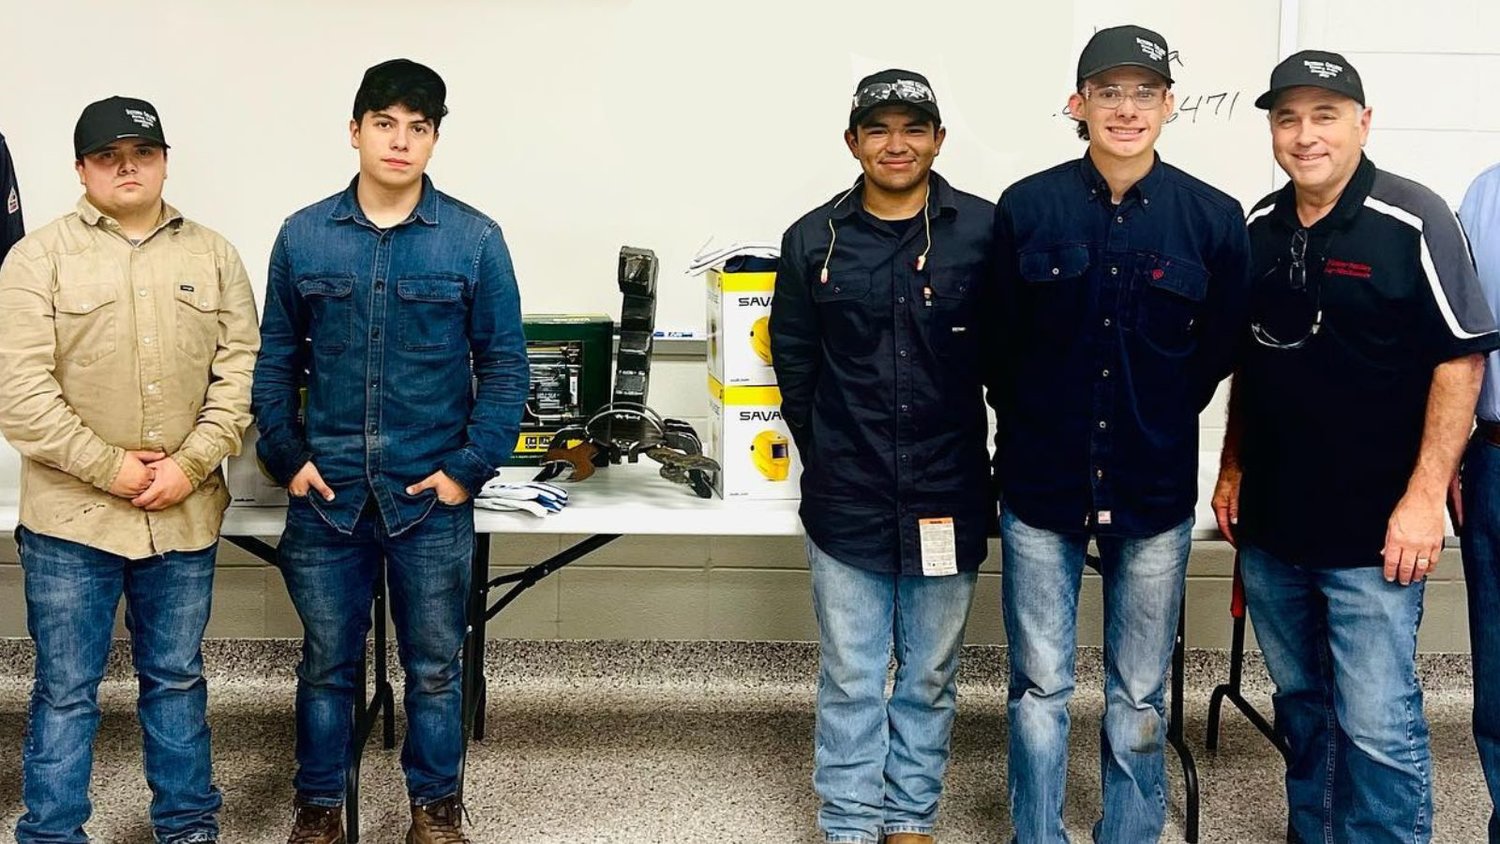 Nixon-Smiley High School won first place in Victoria College’s Welding Rodeo on Nov. 4. Pictured left to right are Jay Mendez, Adrik Rodriguez, Miguel Valerio, and Preston Rice along with their welding instructor, Clarence Bahlmann.